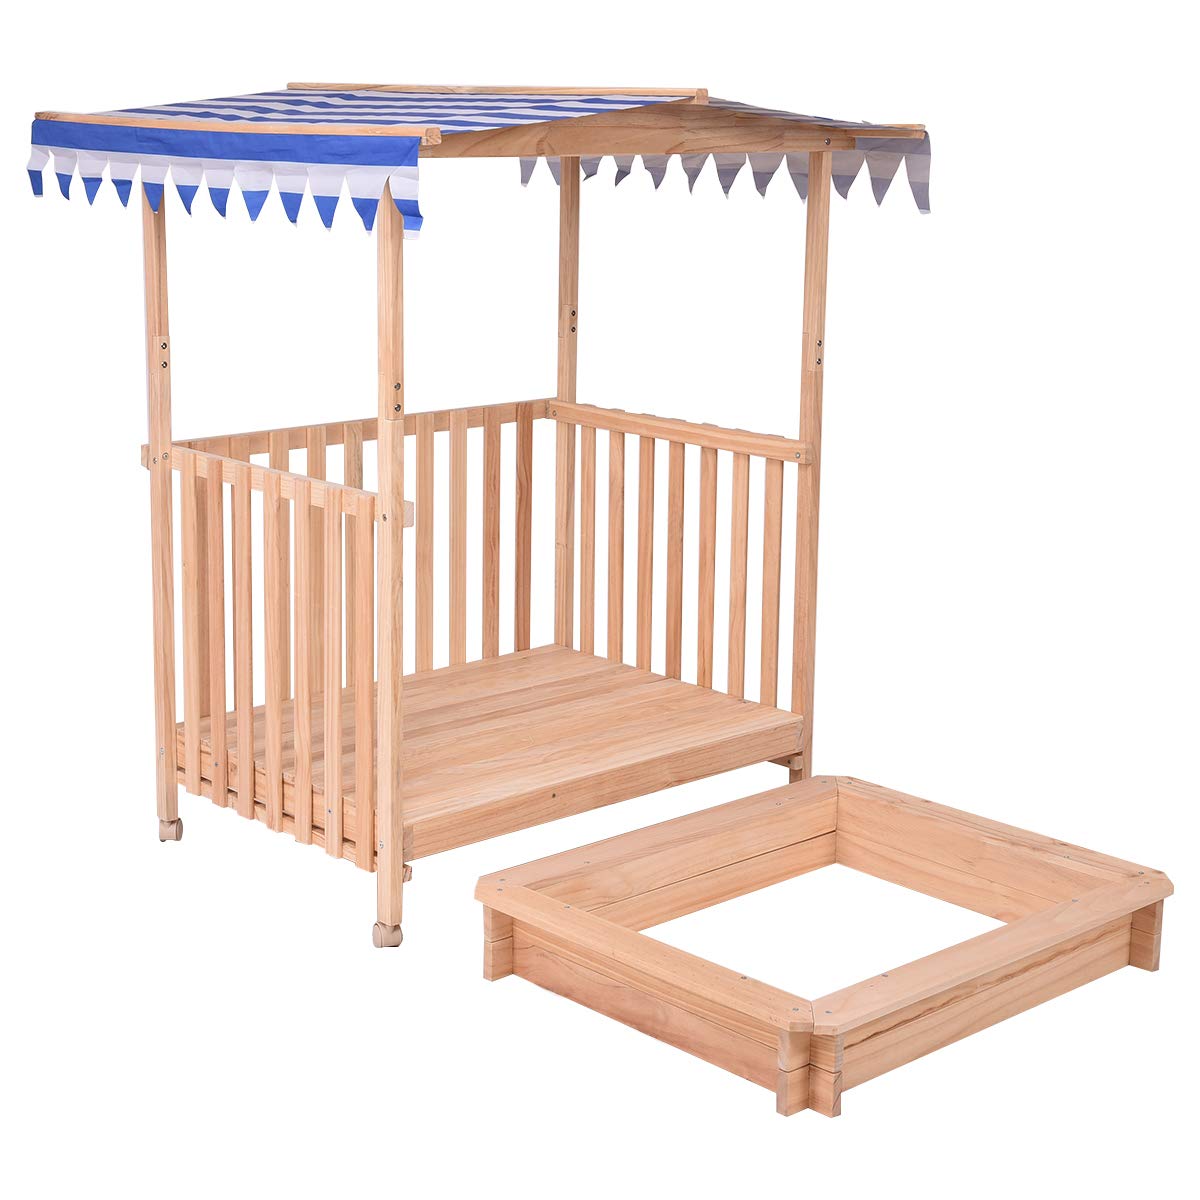 Costzon Kids Retractable Playhouse w/ Sandbox Canopy, Non-Woven Fabric Cloth, Wood Frame Play Area, Two Wheels, Children Outdoor Beach Cabana Sandbox for Outdoor, Home, Lawn, Courtyard (45-Inch, Blue)